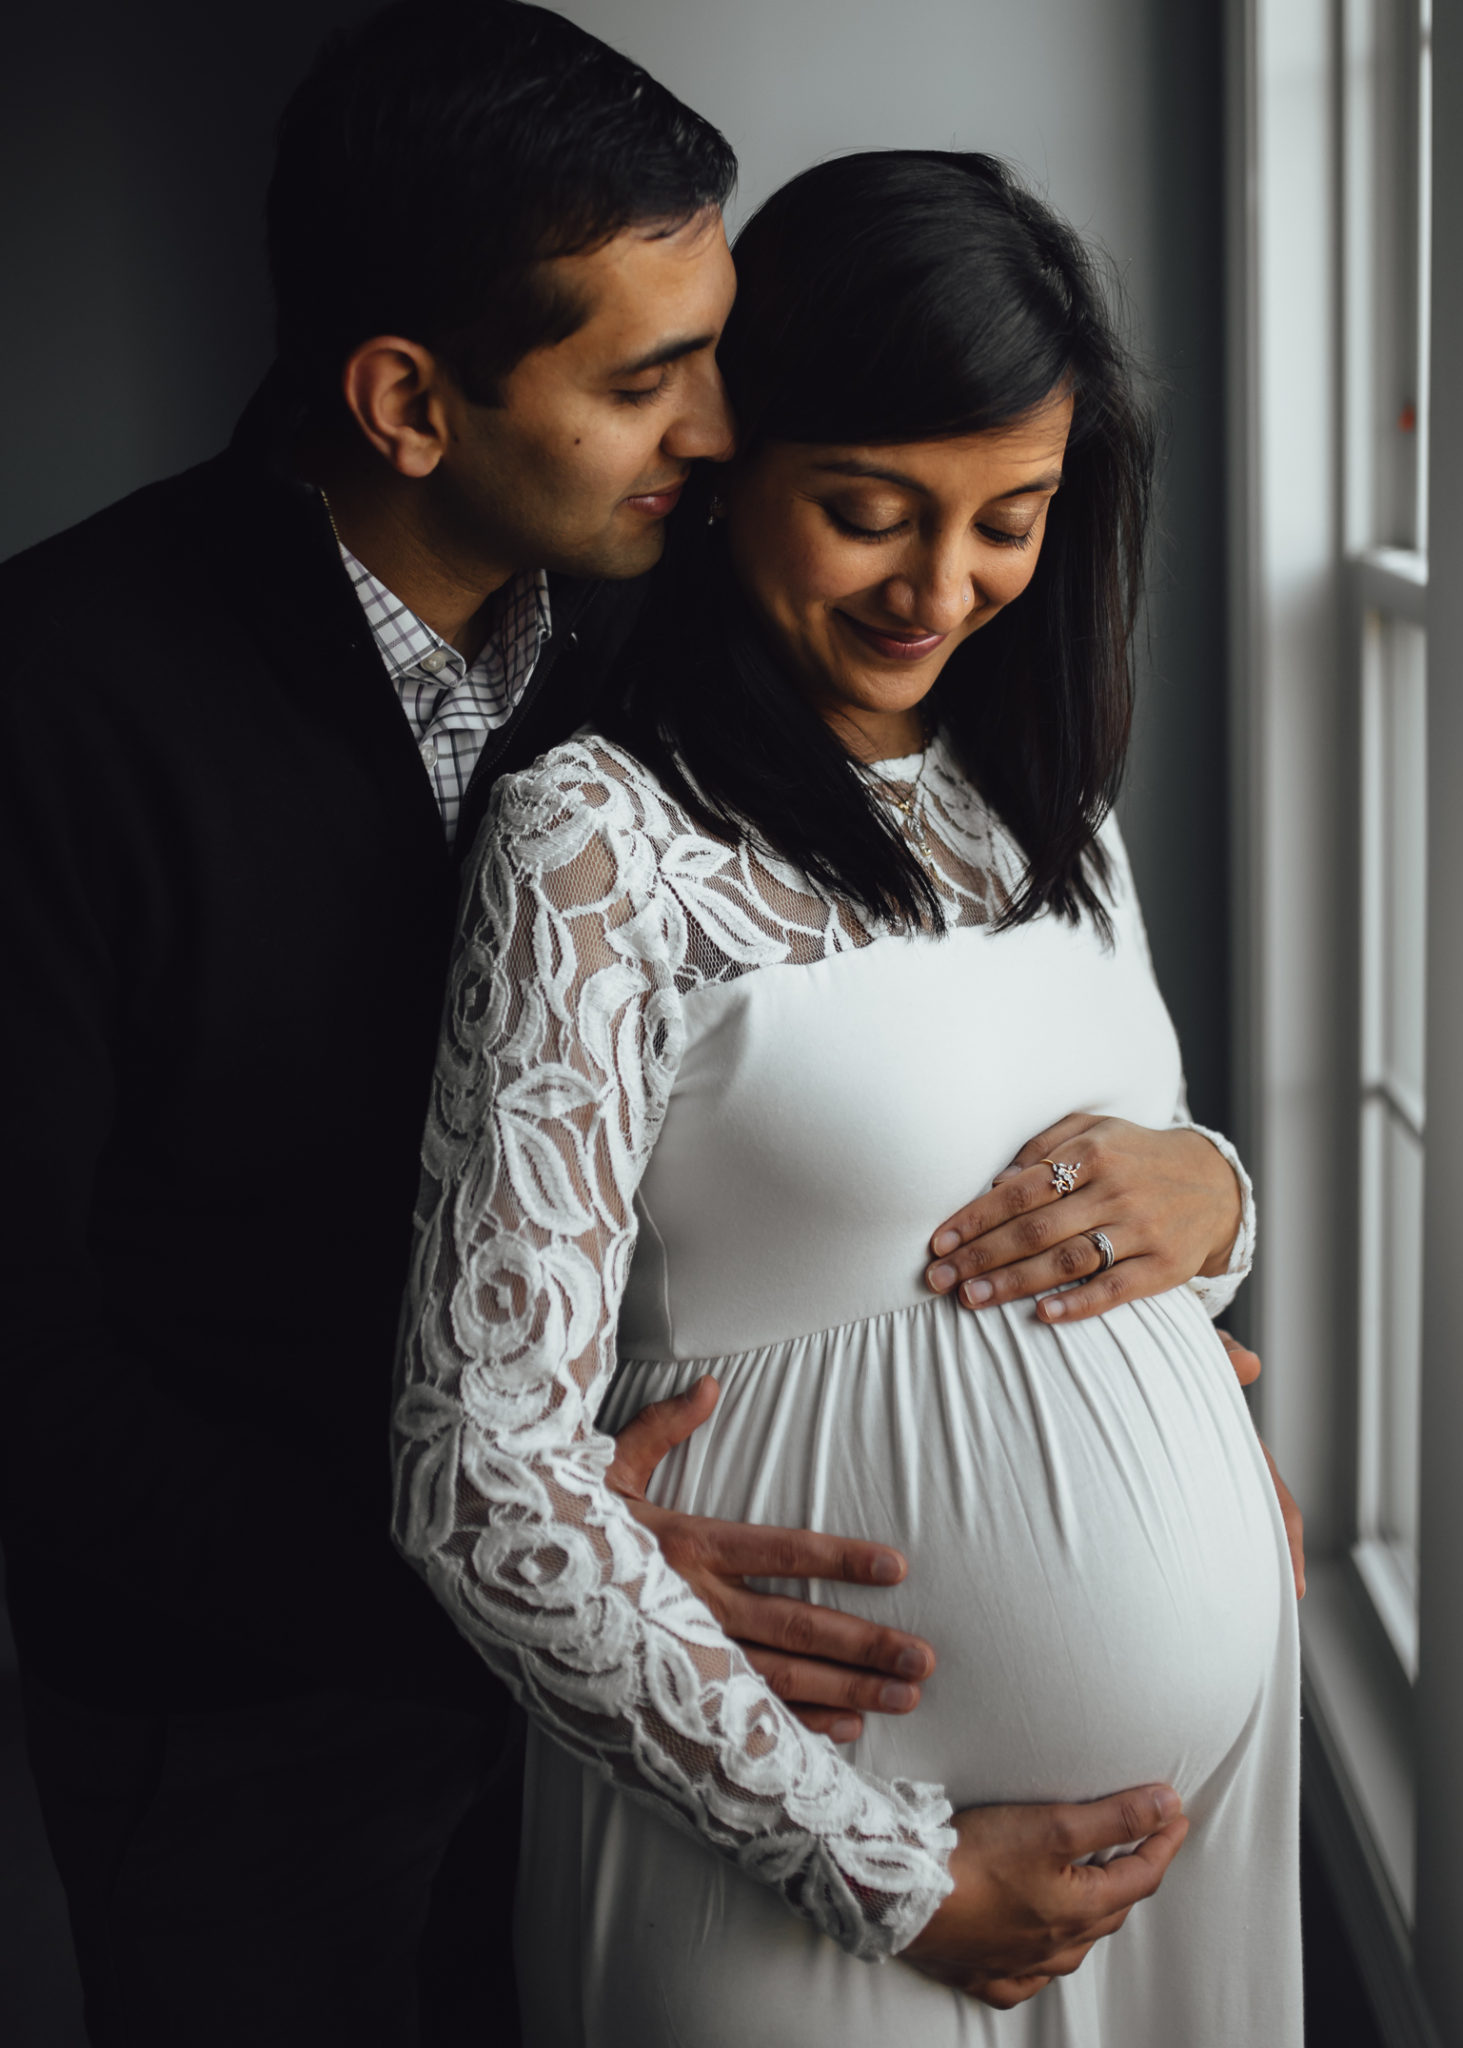 Maternity Photography in North Andover, MA